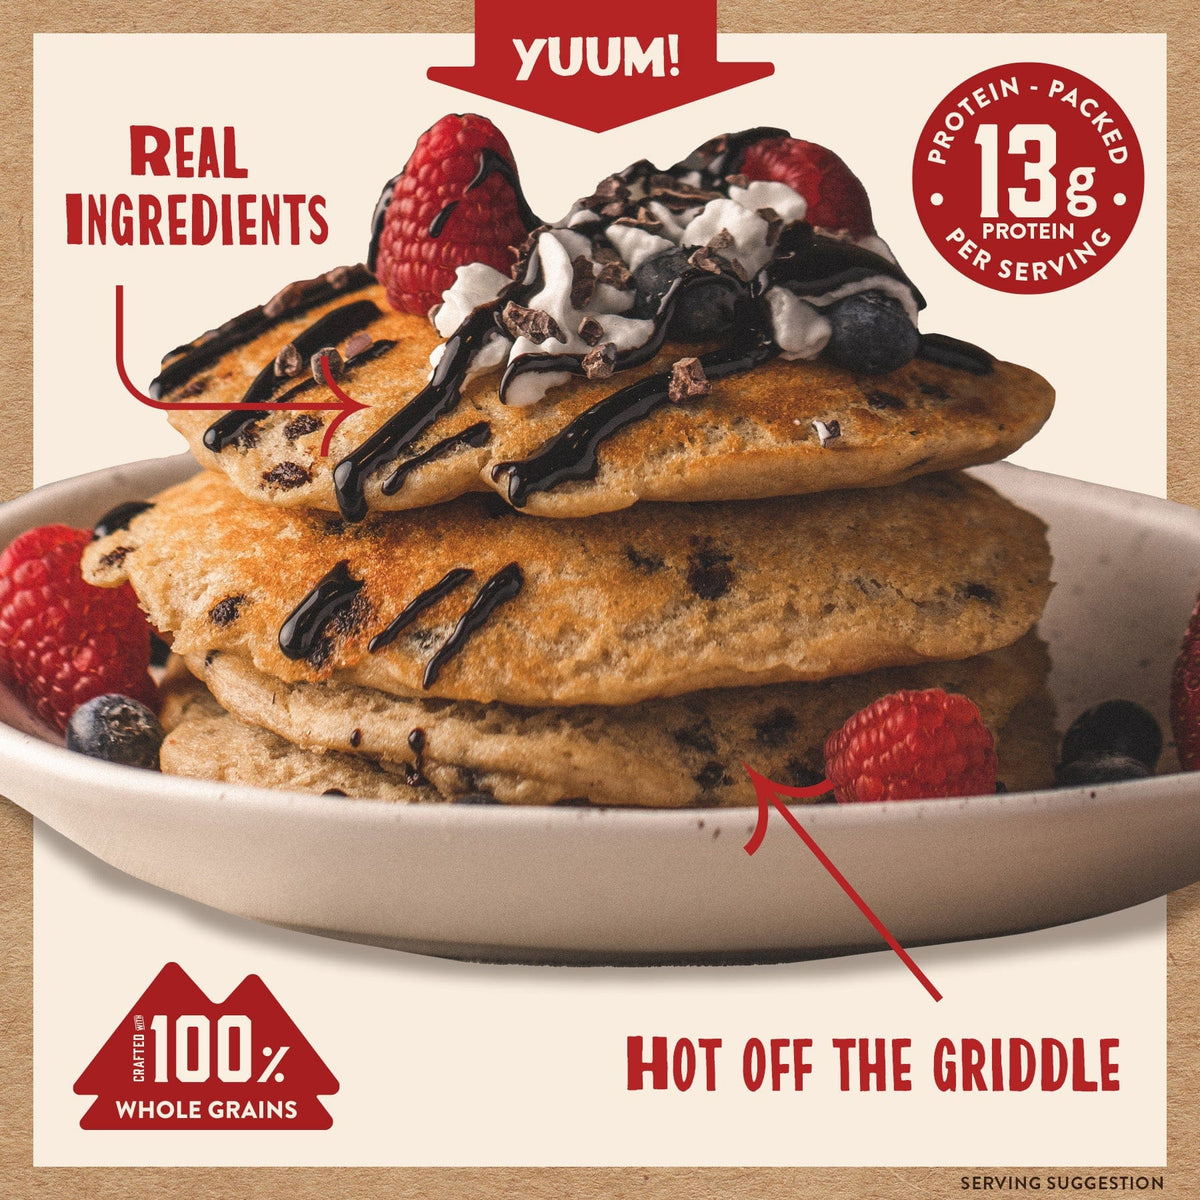  Kodiak Cakes Power Cakes, Pancake & Waffle Mix, Chocolate  Chip, High Protein,100% Whole Grains (Pack of 6) : Grocery & Gourmet Food